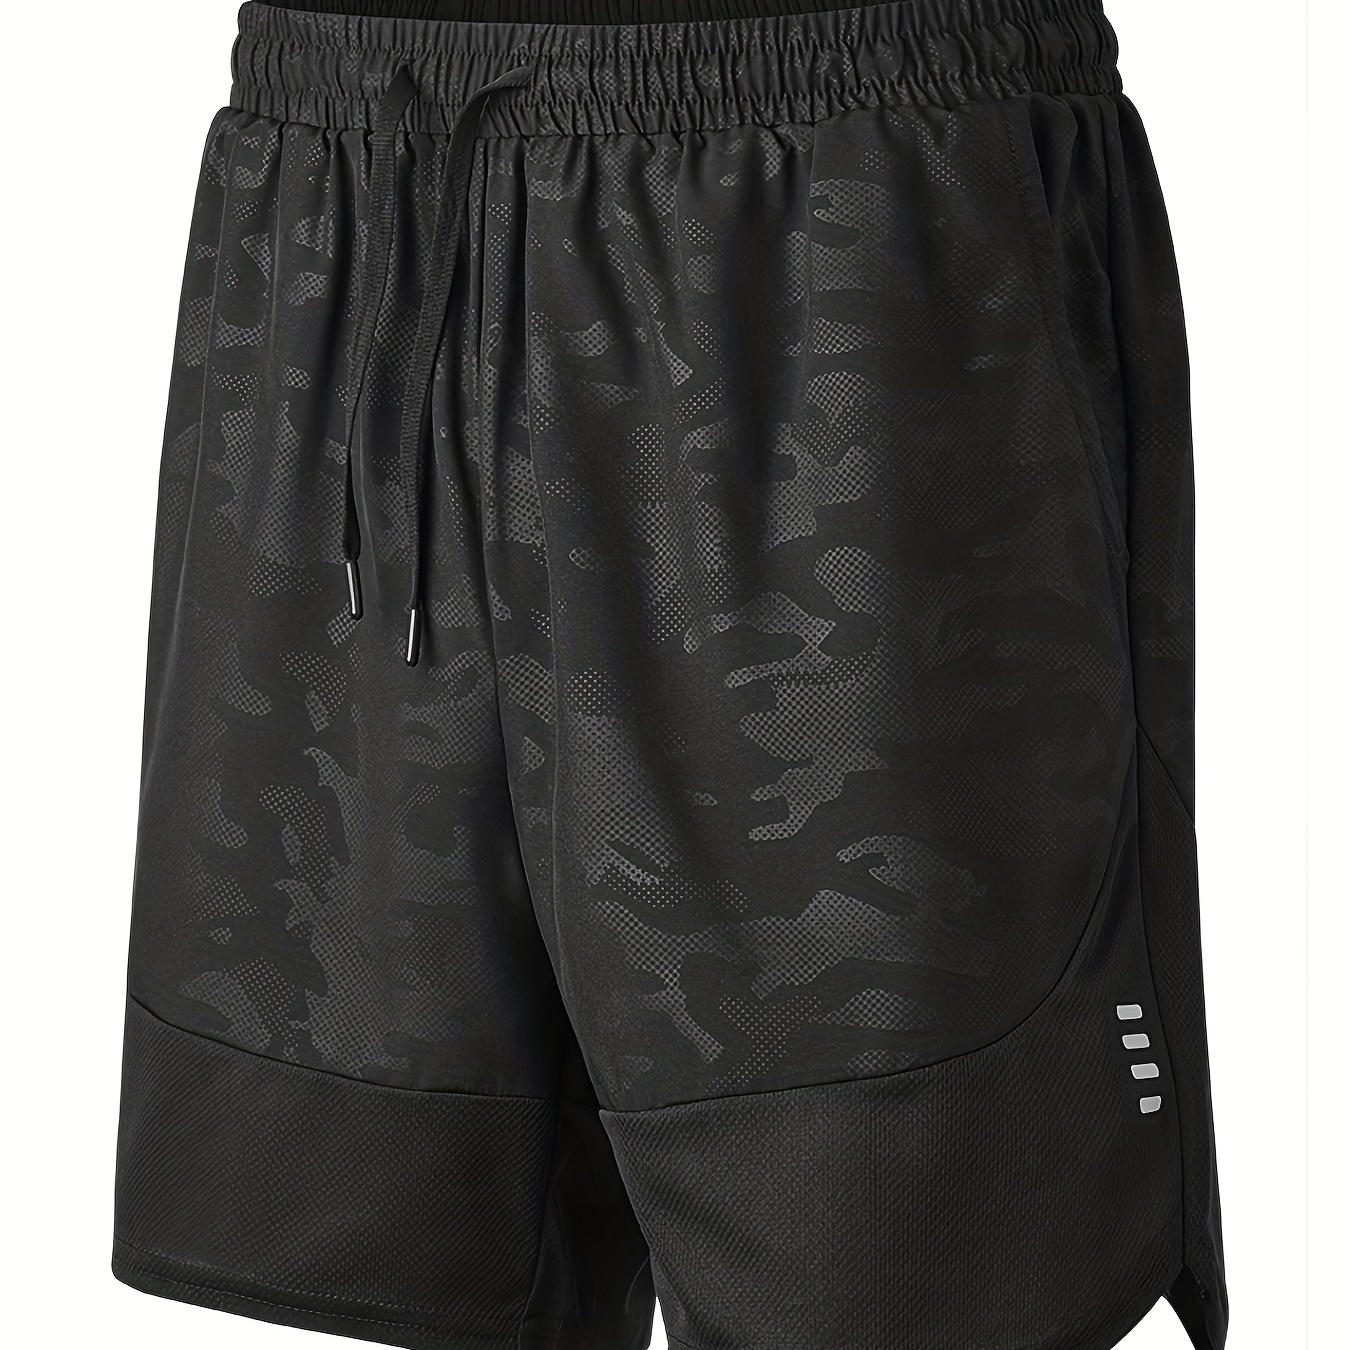 

Quick Dry Camo Sport Shorts For Men - Moisture Wicking, Stretchy, And Perfect For Cycling, Fitness, Gym, And Outdoor Activities